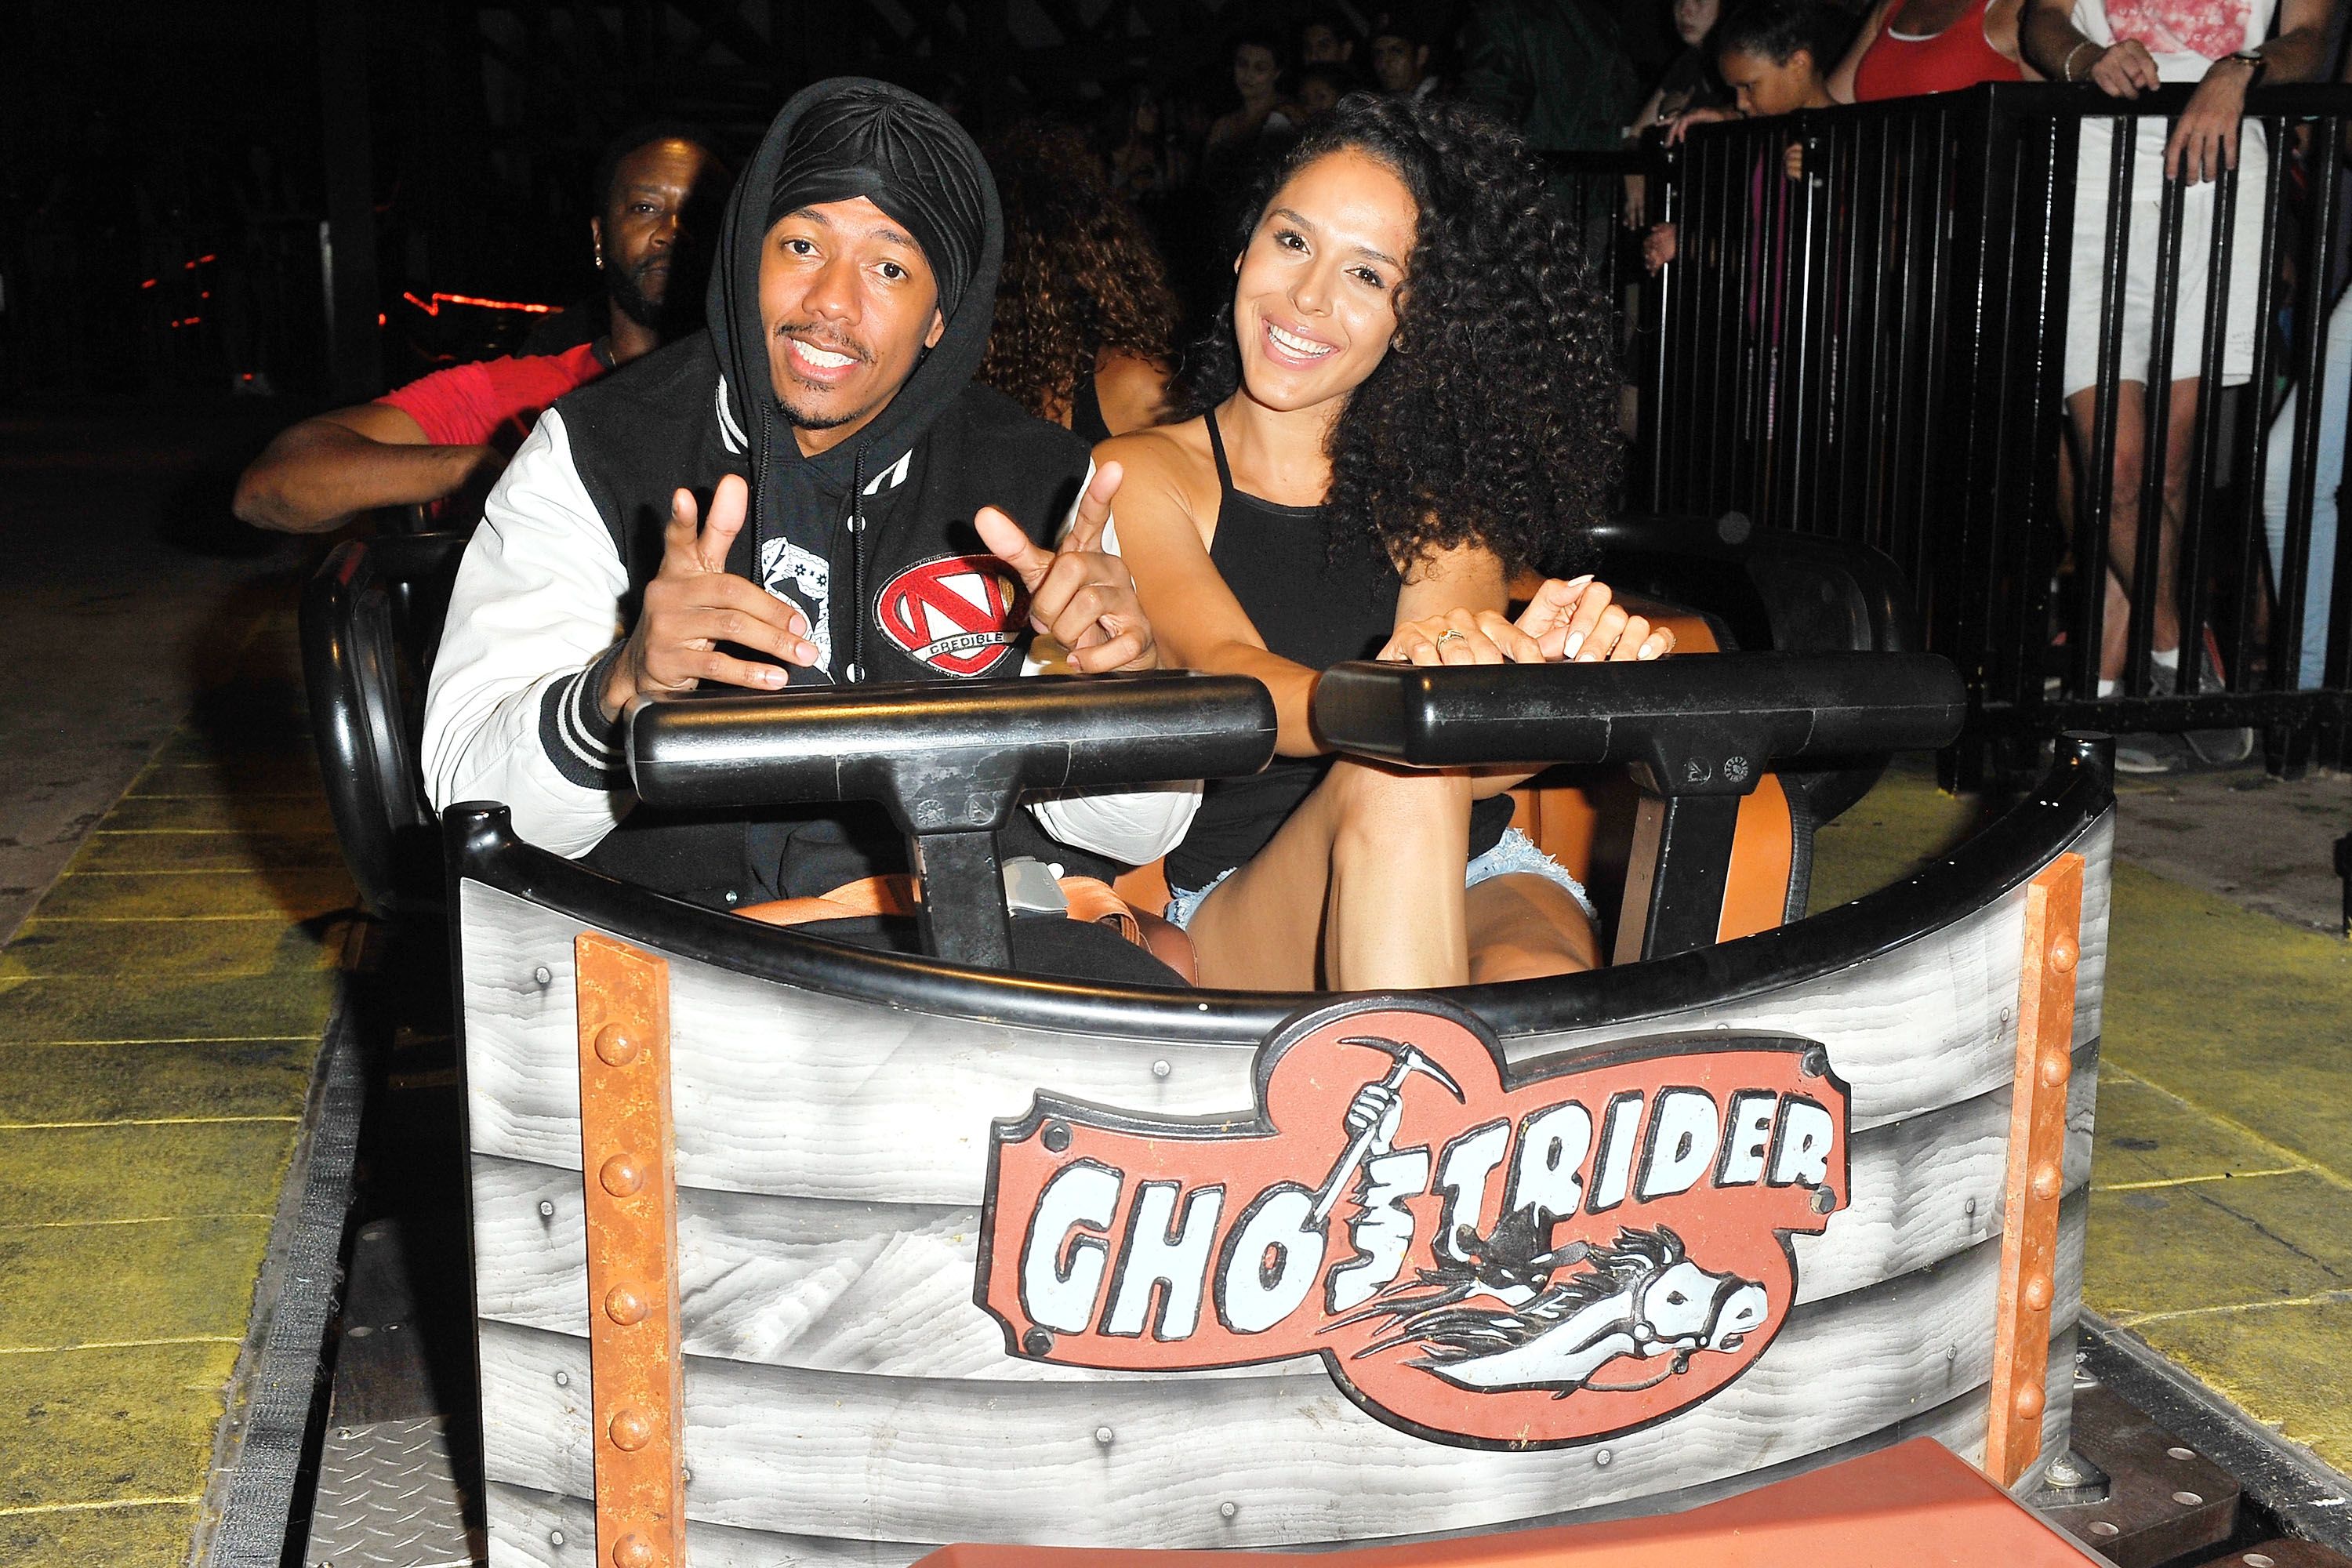 Nick Cannon and Brittany Bell ride the 'Ghostrider' roller coaster at Knott's Berry Farm on September 1, 2017 | Photo: Getty Images